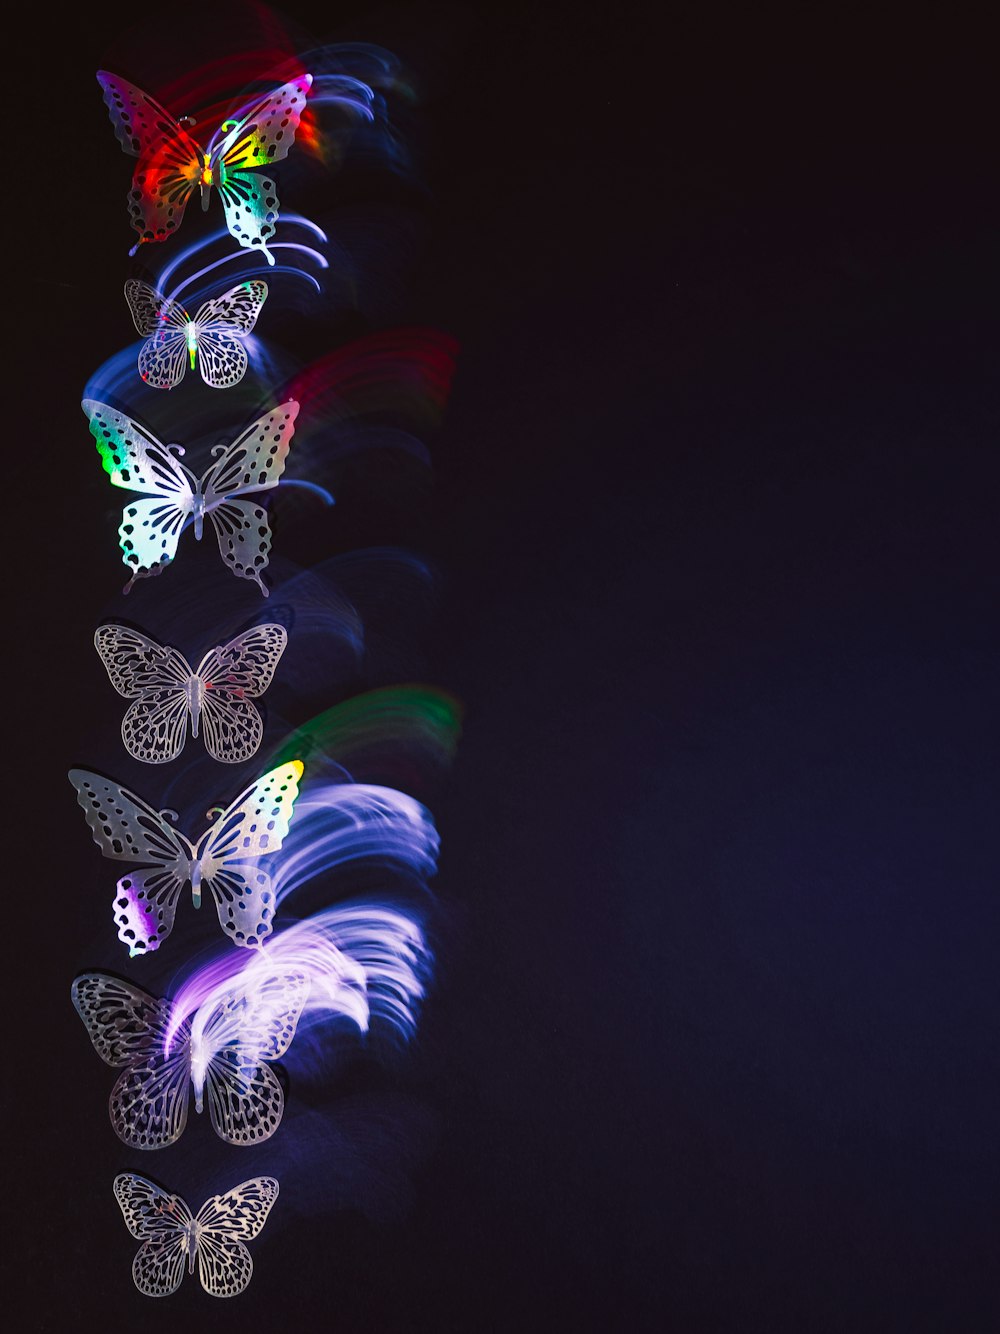 a group of butterflies flying through the night sky